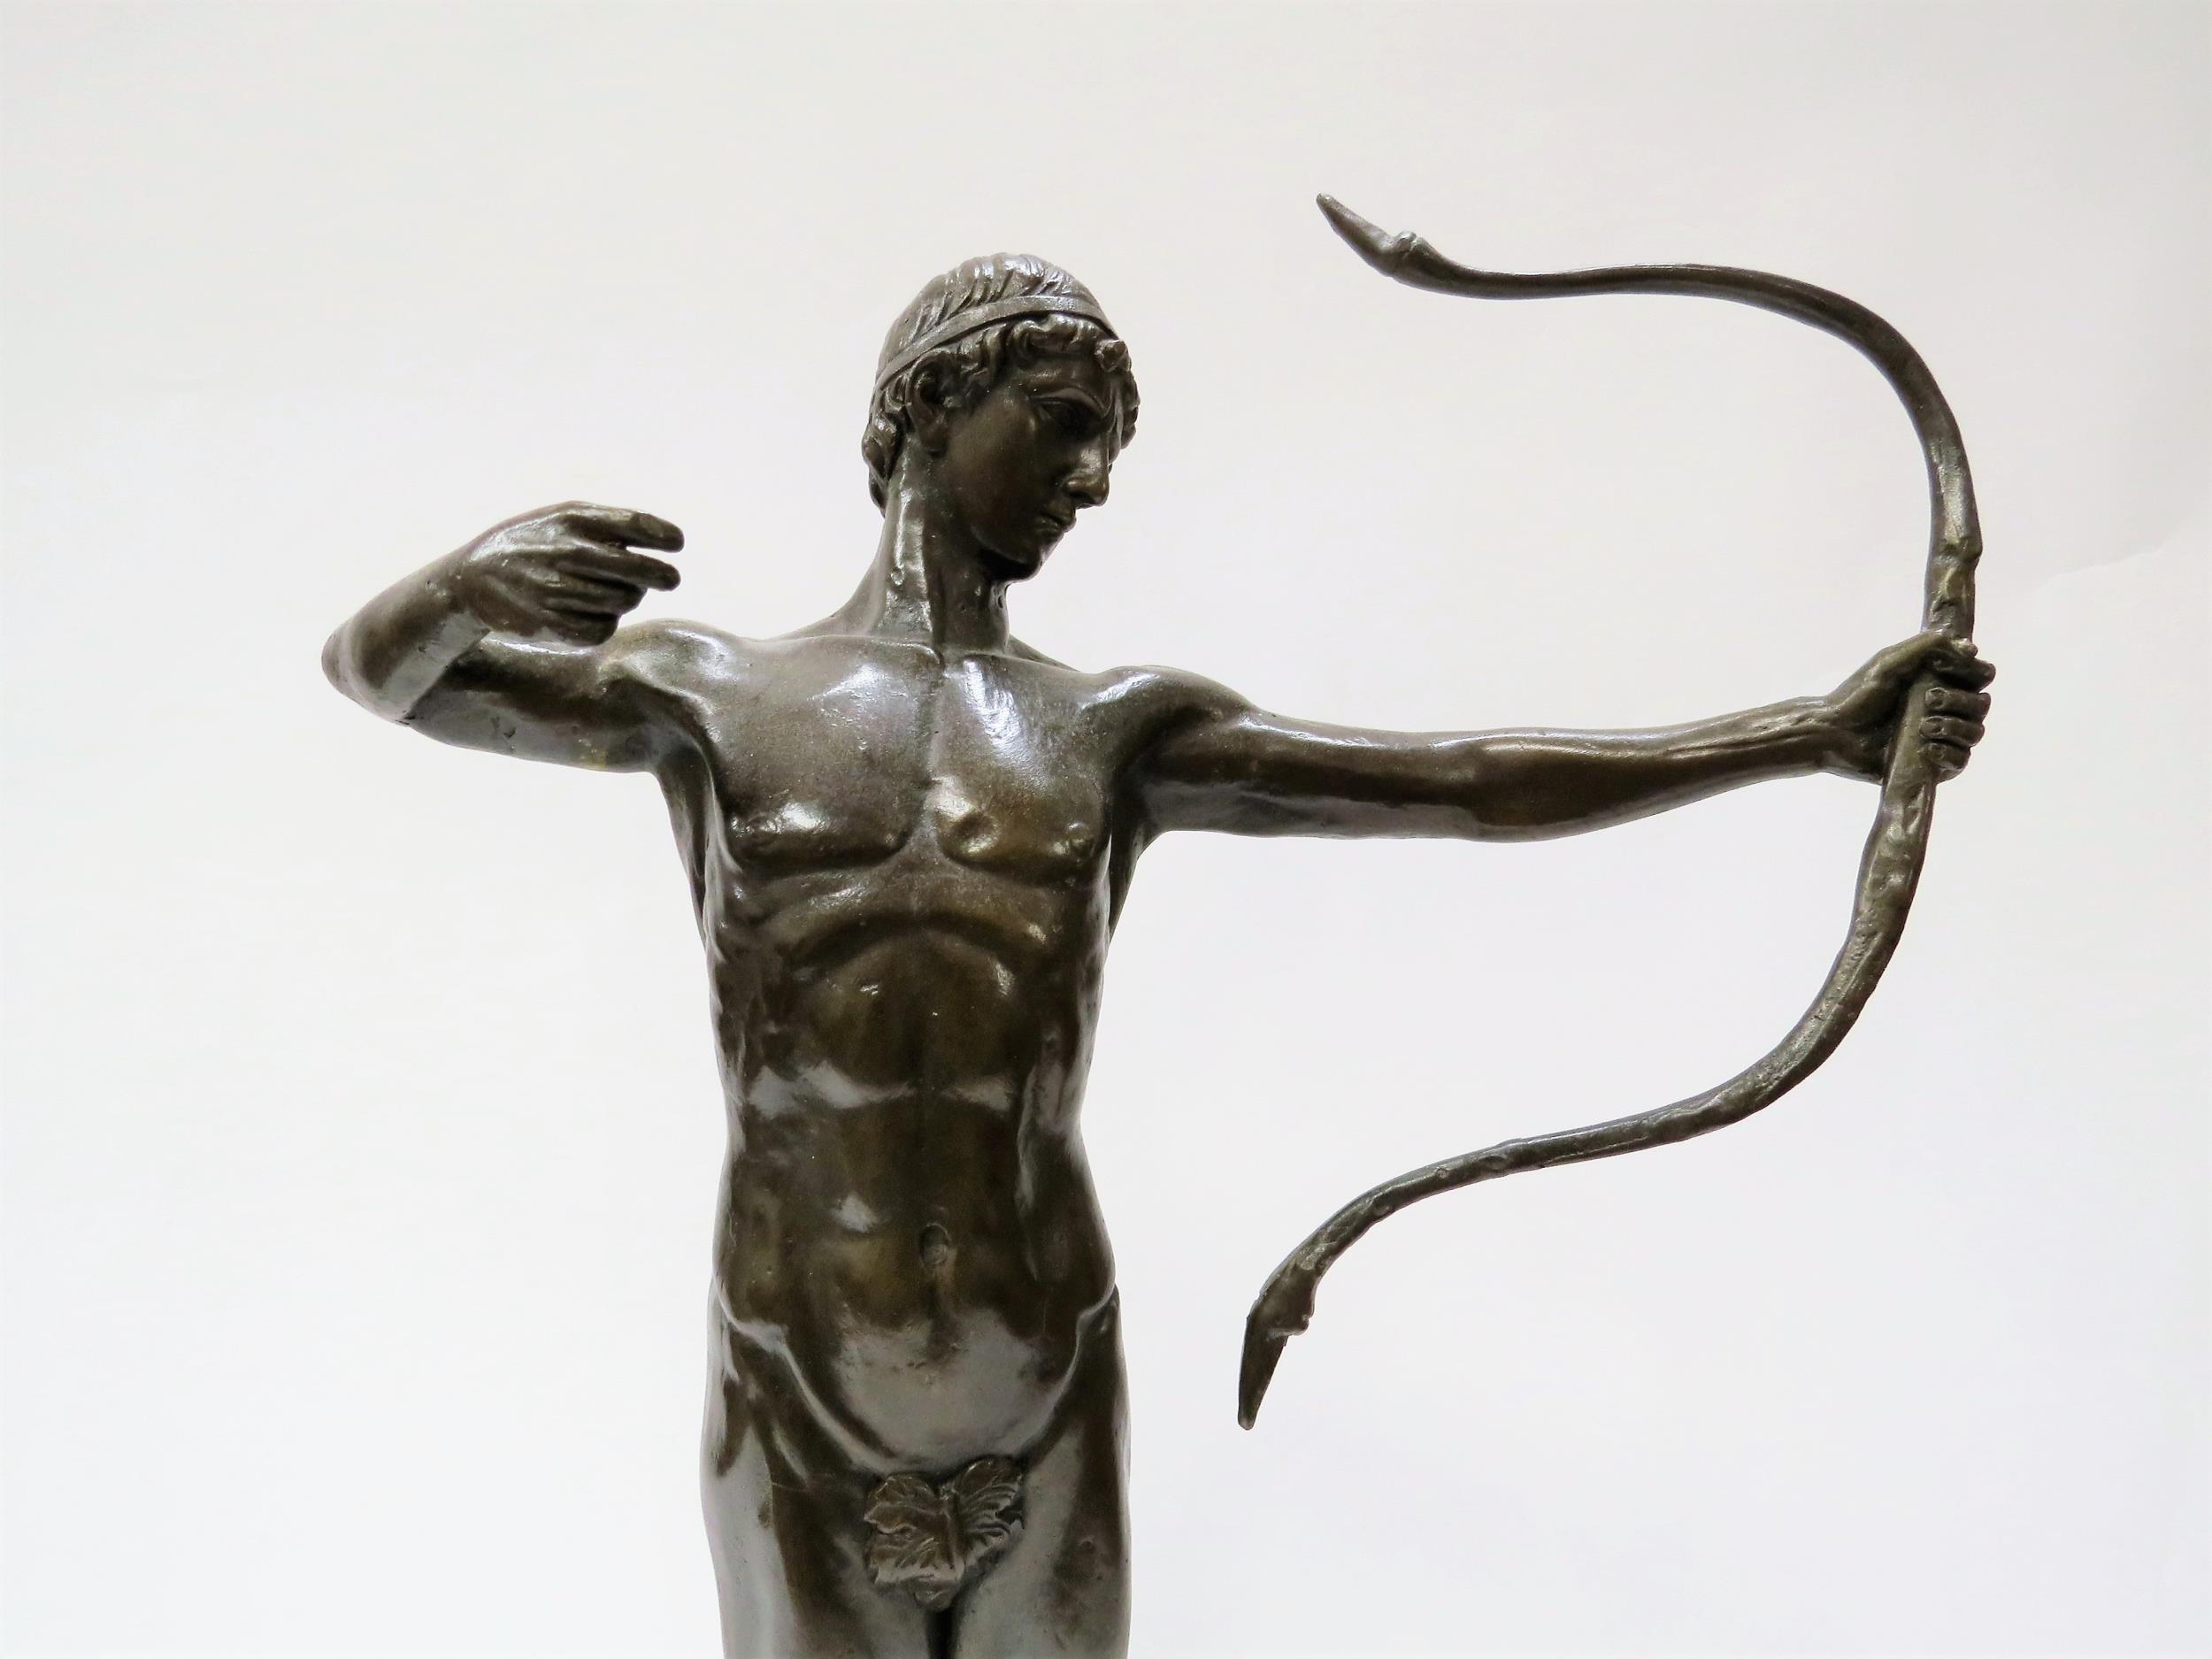 A bronze sculpture in the manner of Sir William Hamo Thornycroft's work depicting the champion Greek - Image 2 of 3